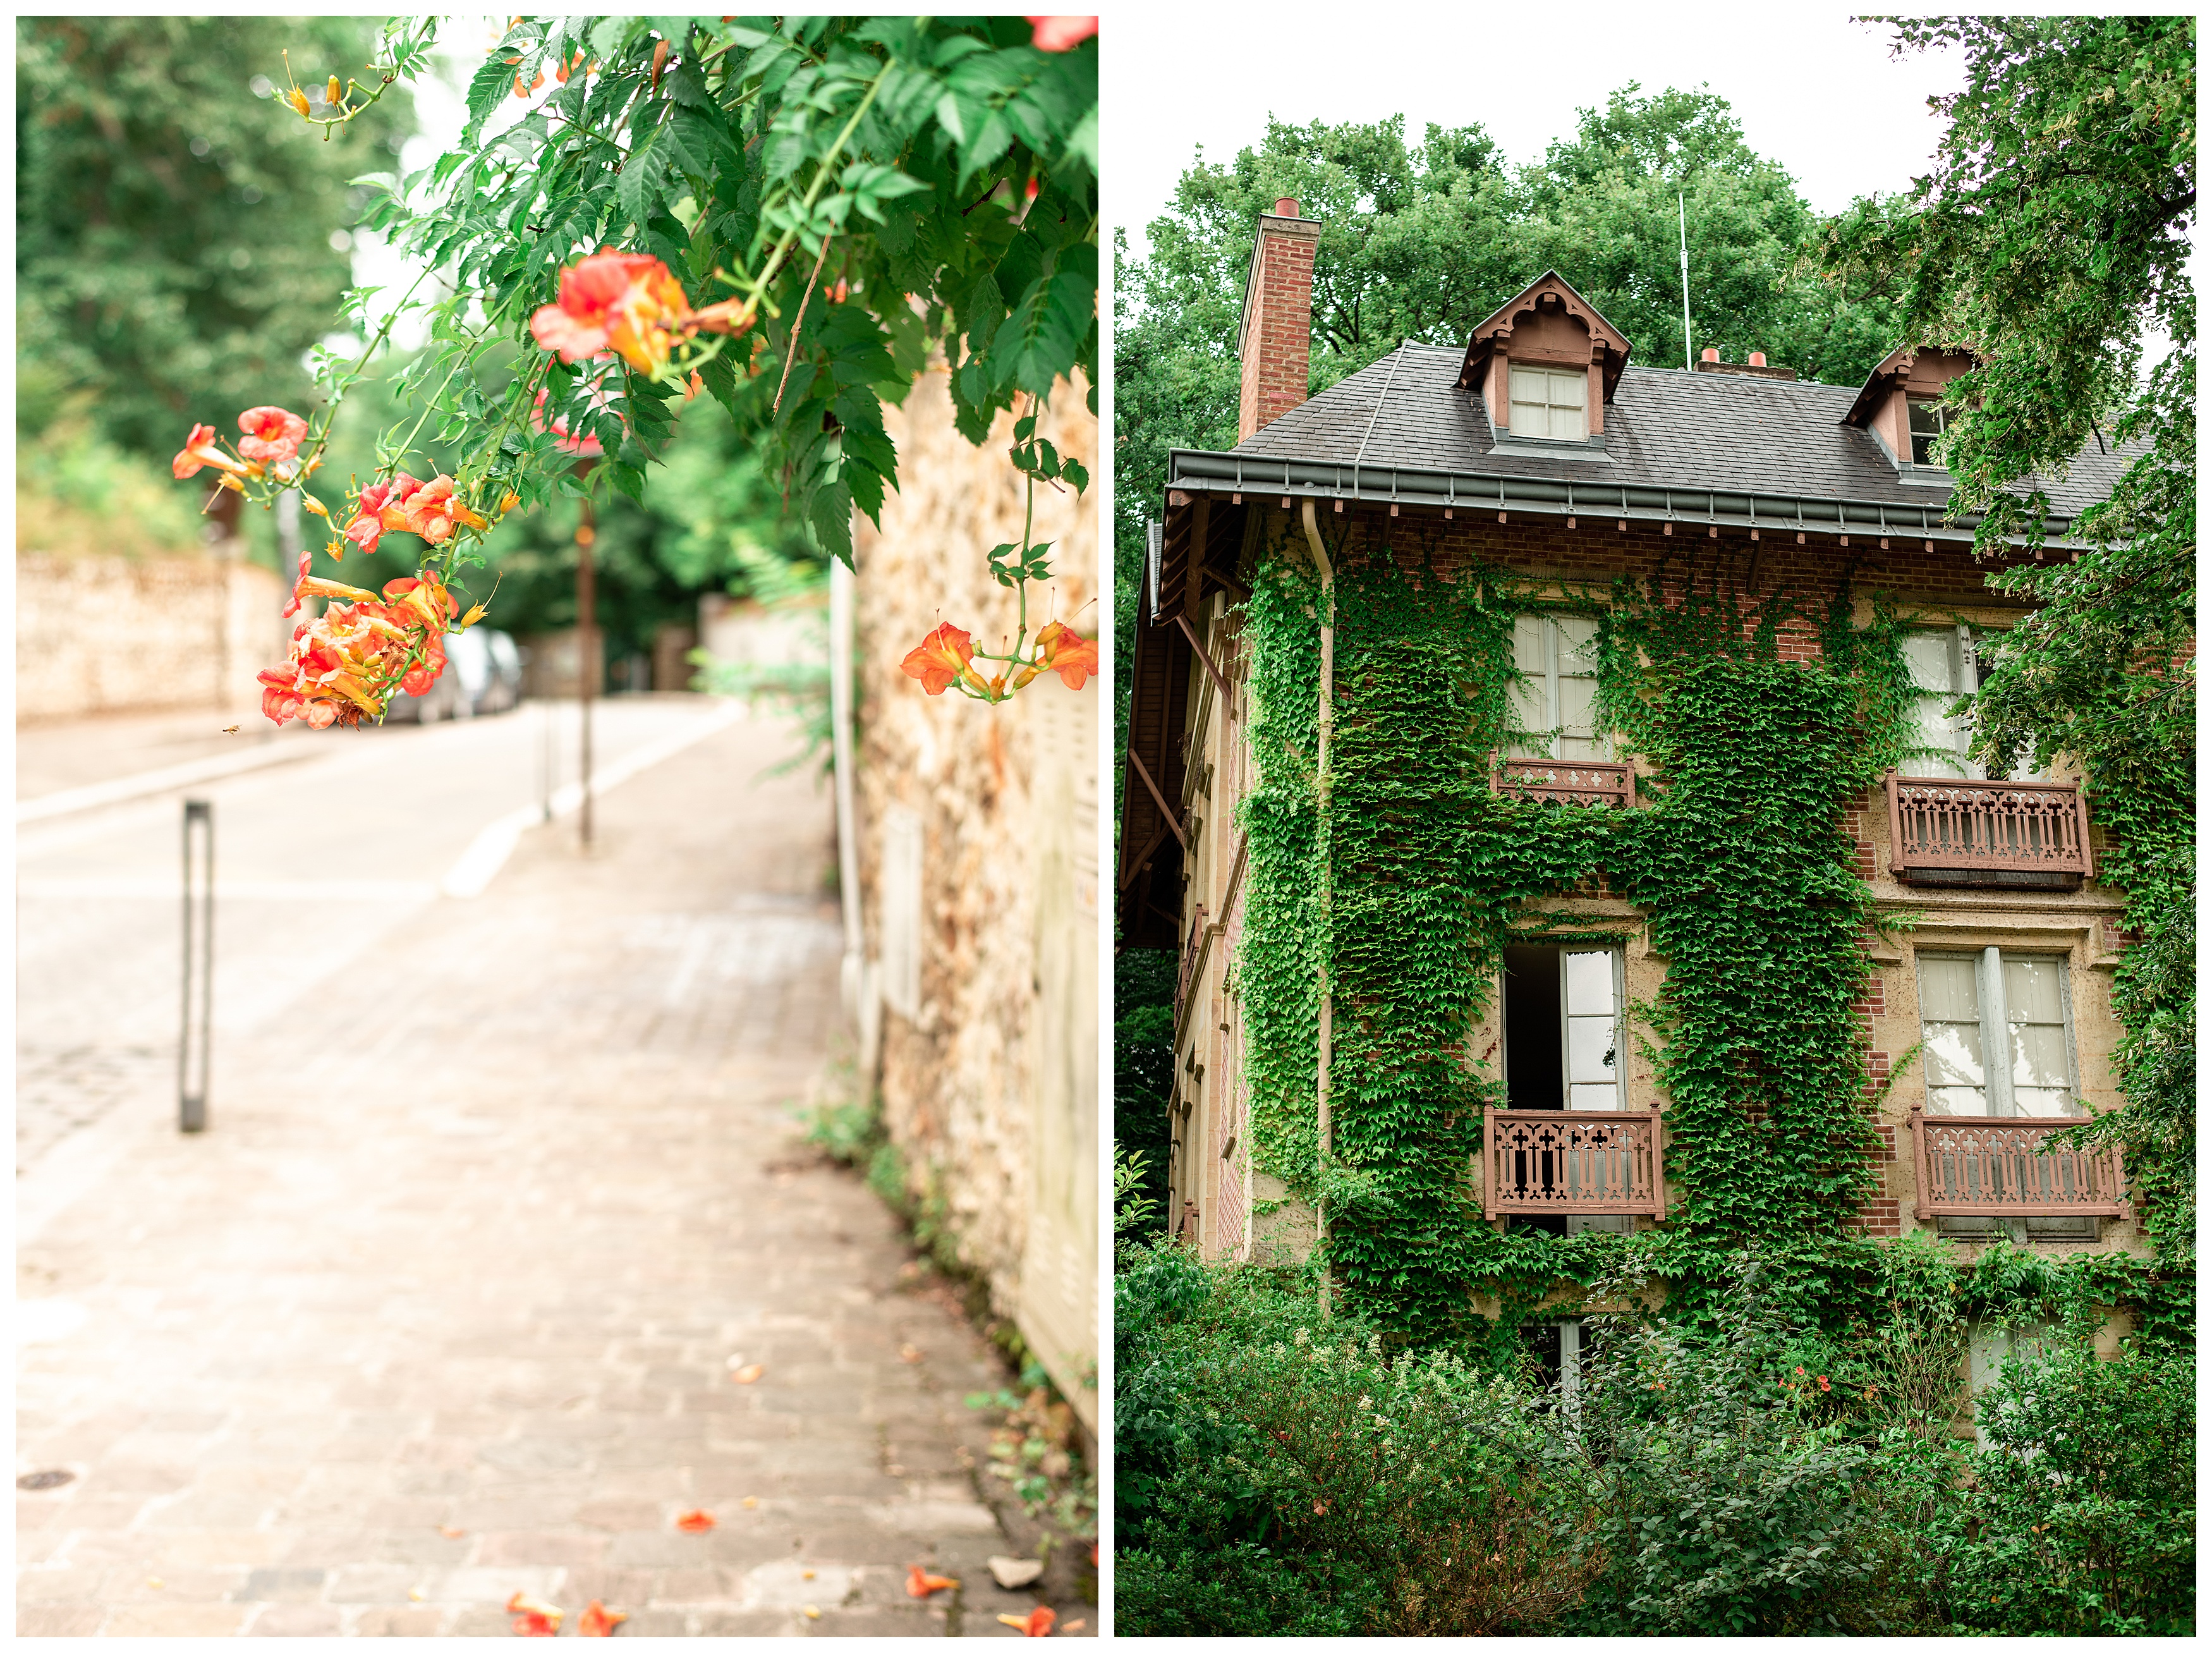 left: orange and red trumpet flowers in the town of robinson in france; right: vine and ivy-covered façade at the maison de chateaubriand